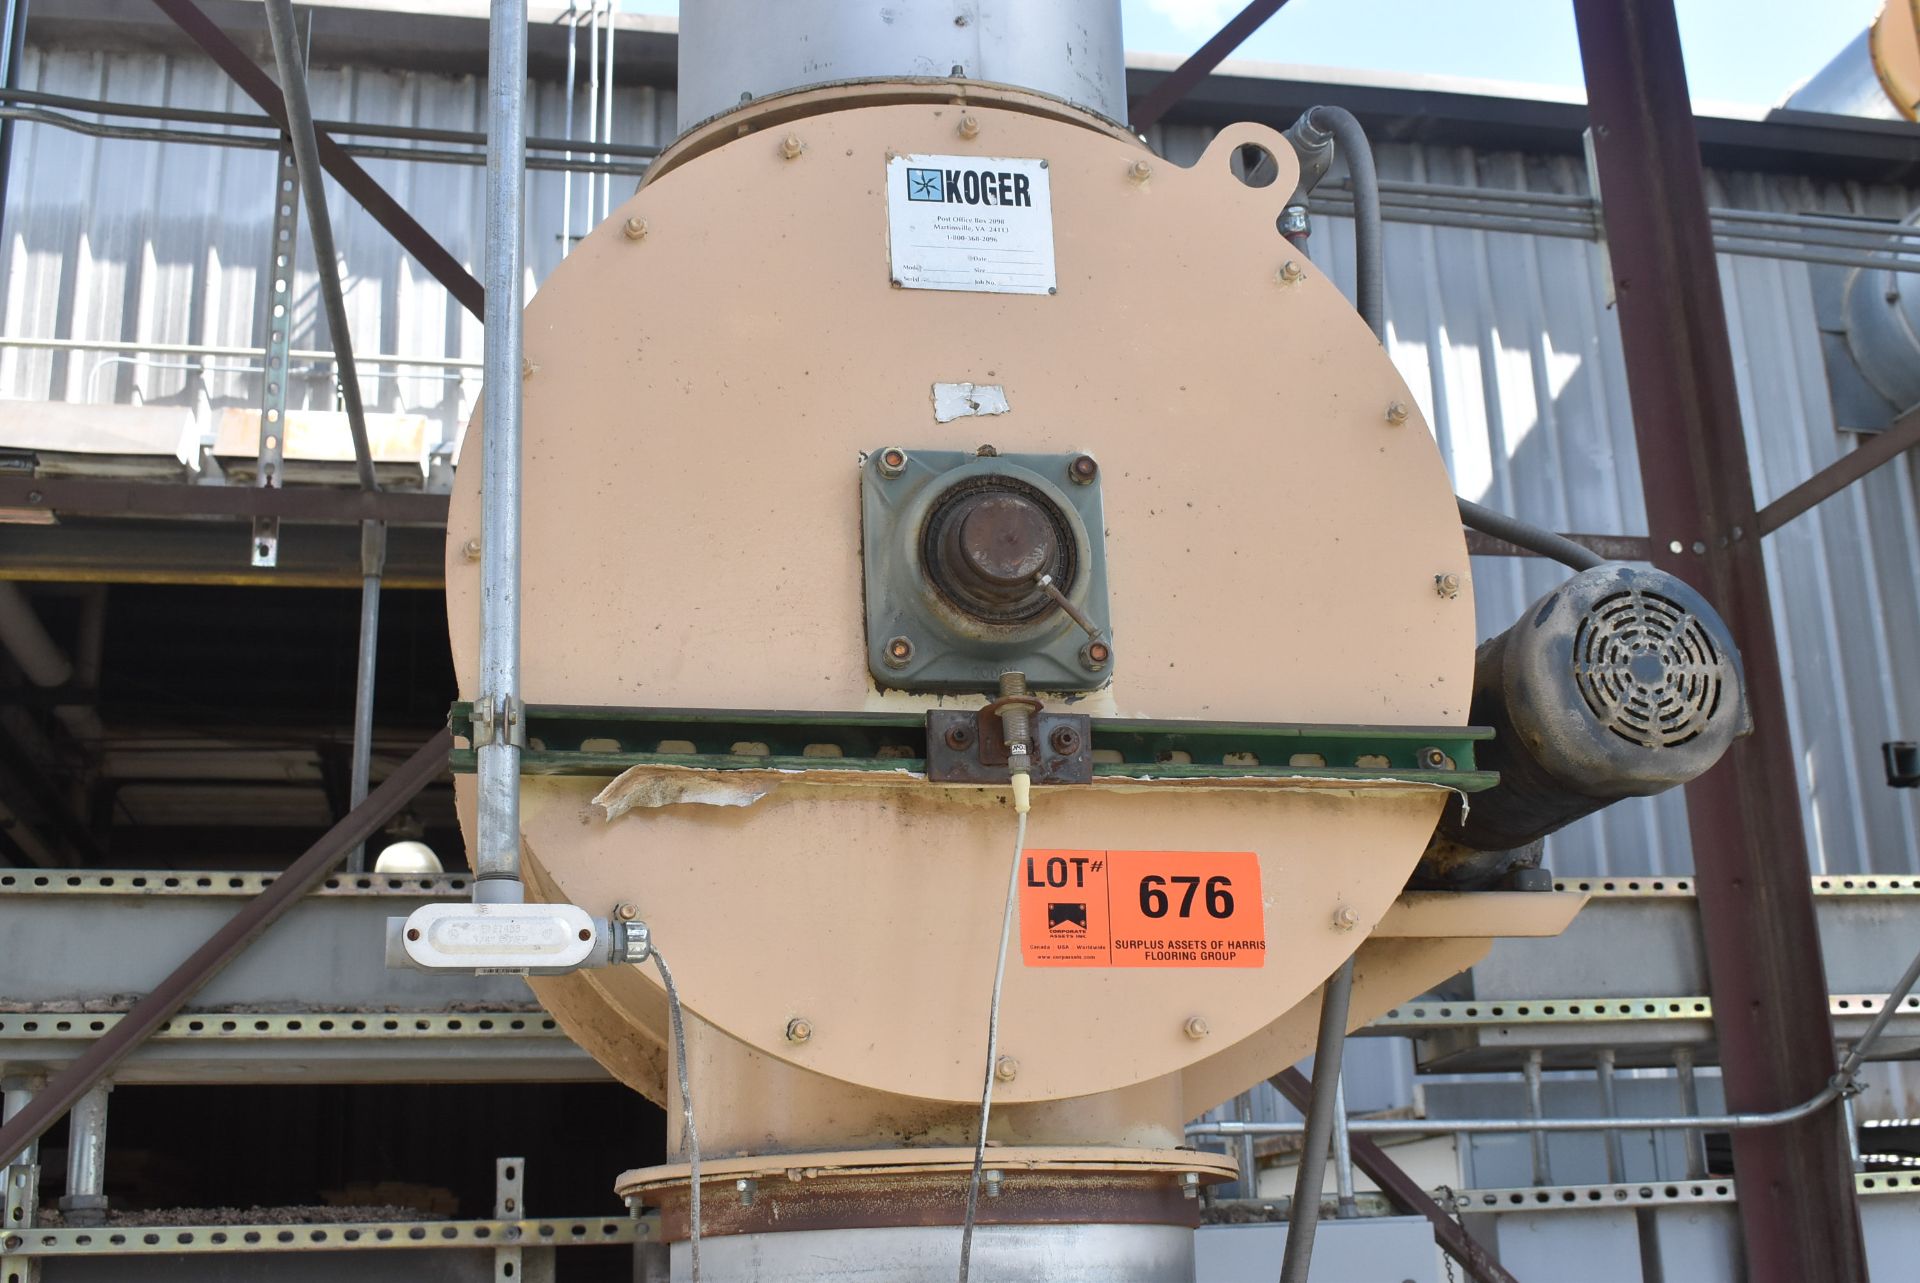 KOGER ROTARY AIR LOCK VALVE (CI) [RIGGING FEE FOR LOT #676 - $300 USD PLUS APPLICABLE FEES]